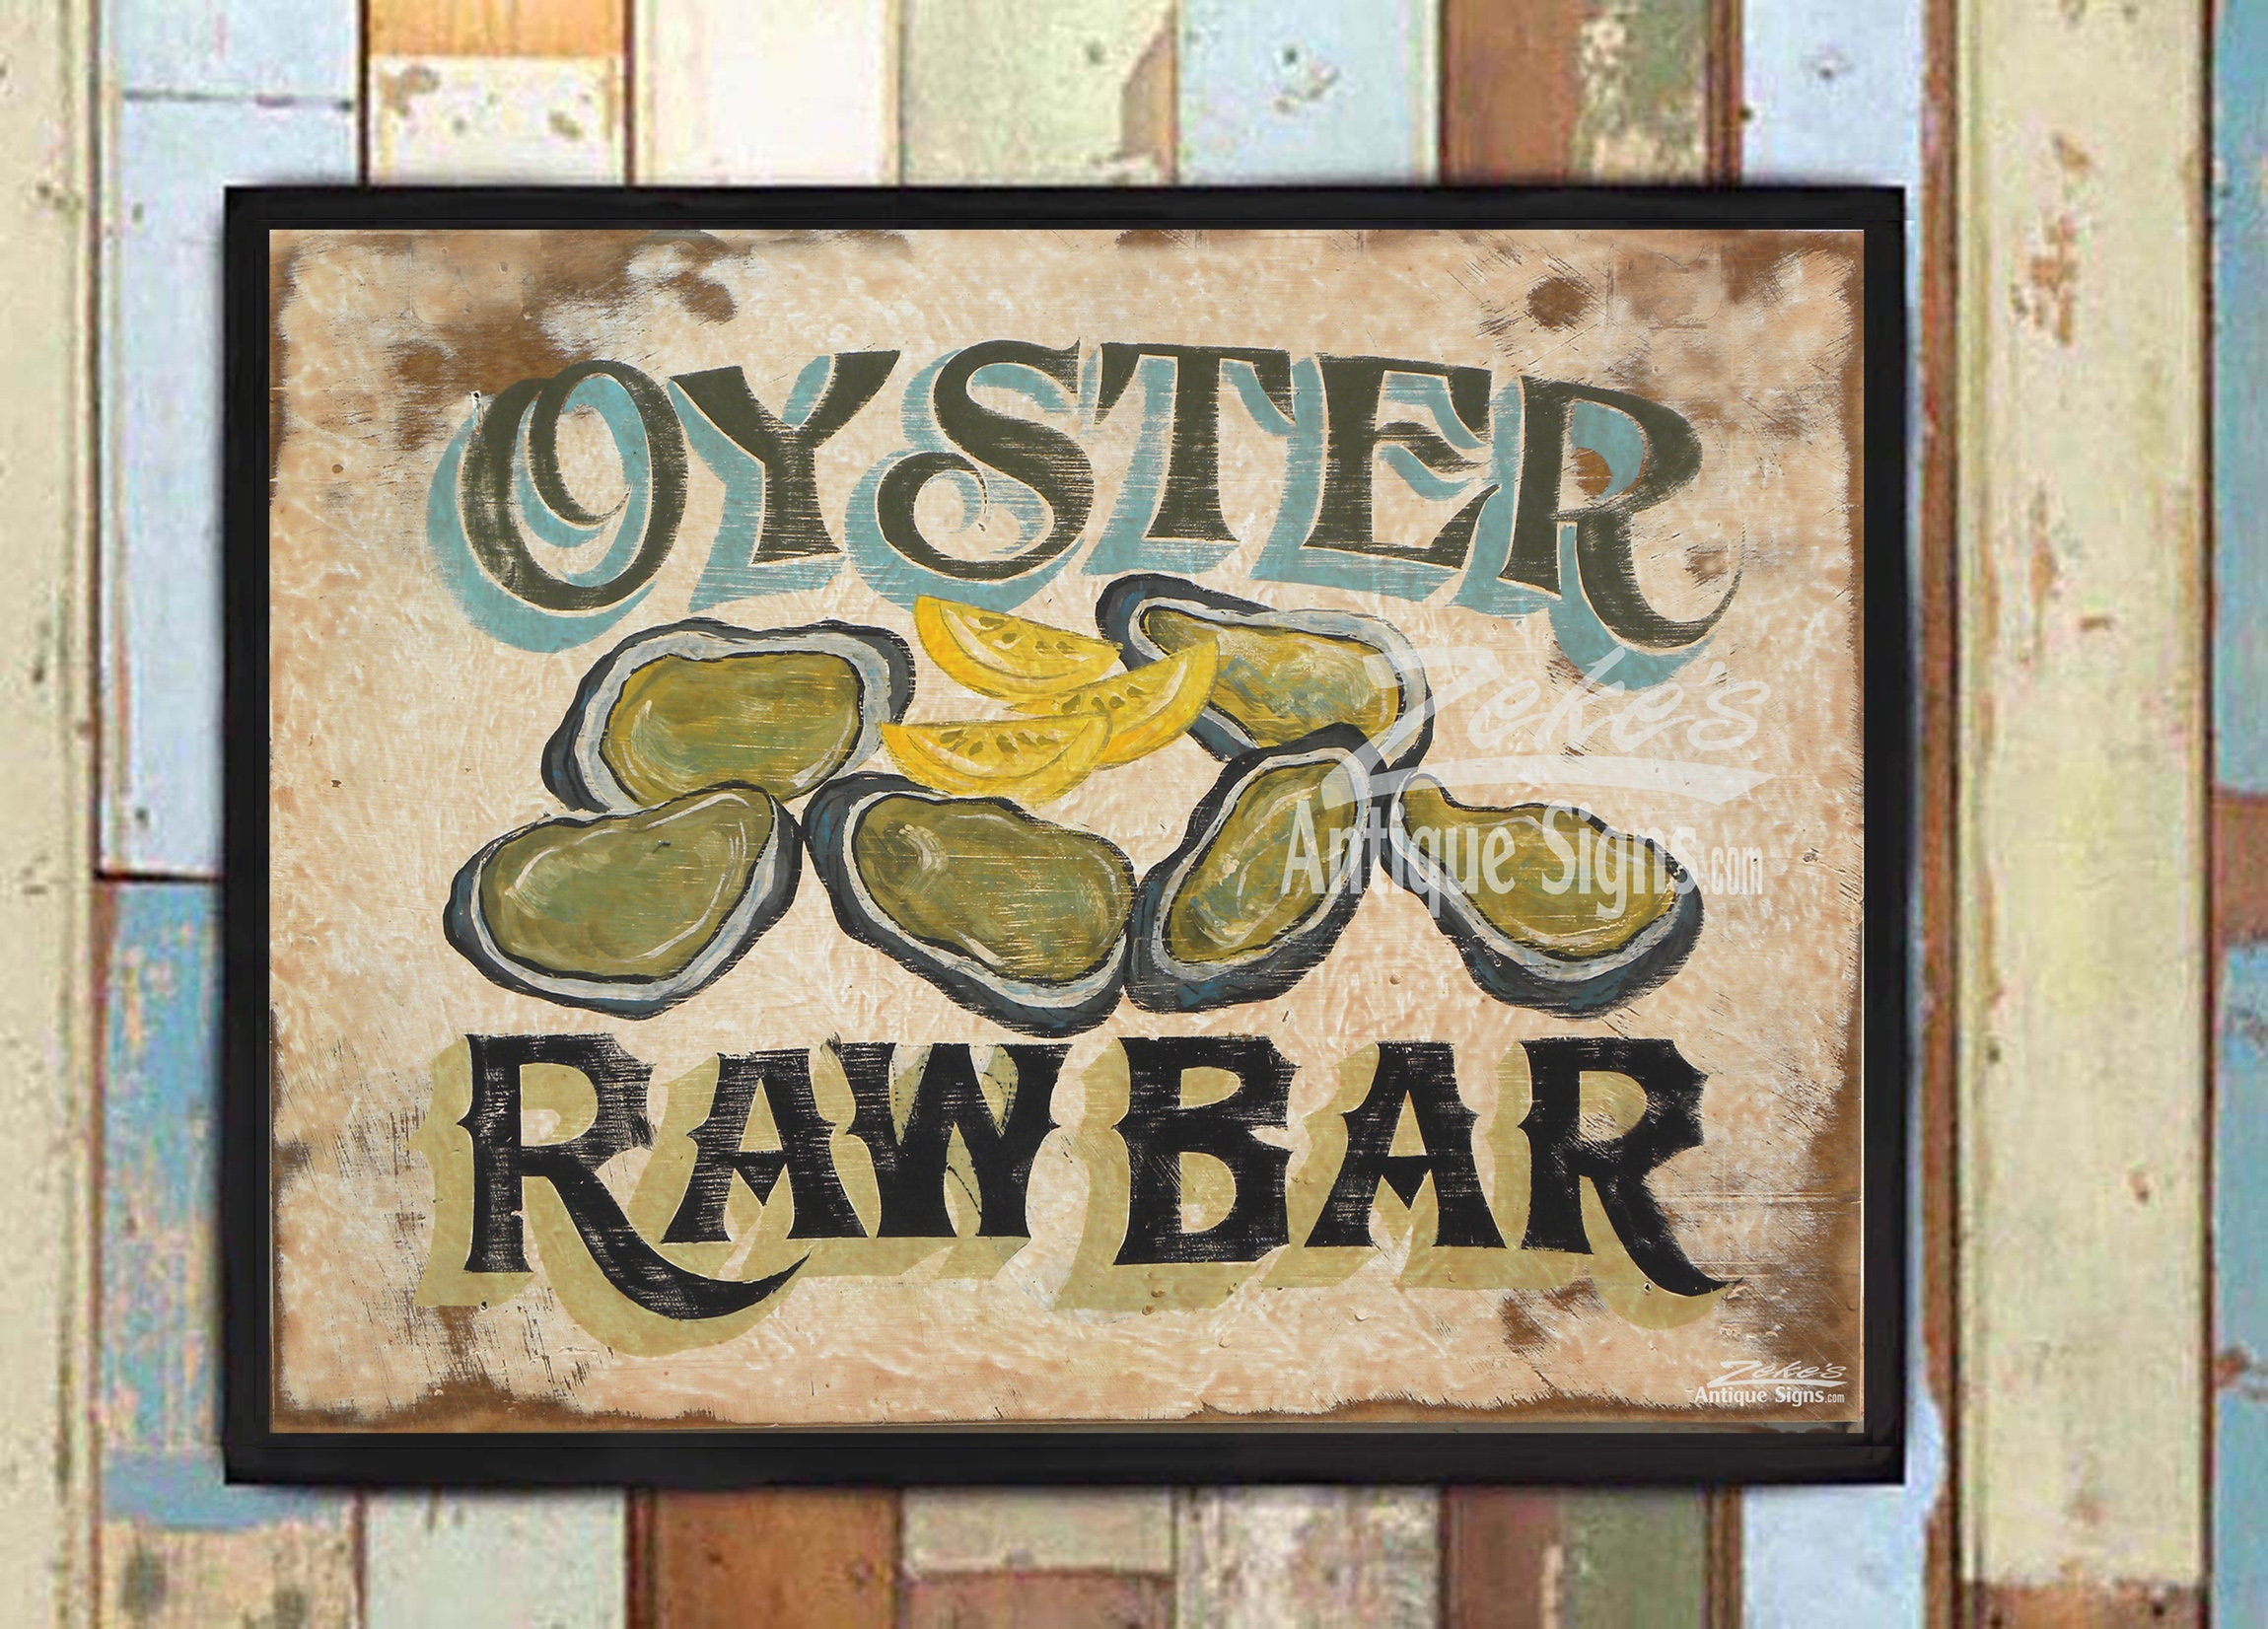 Oyster Bar Print Seafood Beach House Decor, Great For Bar, Home Brewery Or Restaurant This Art Generates Discussions. Hand Lettered